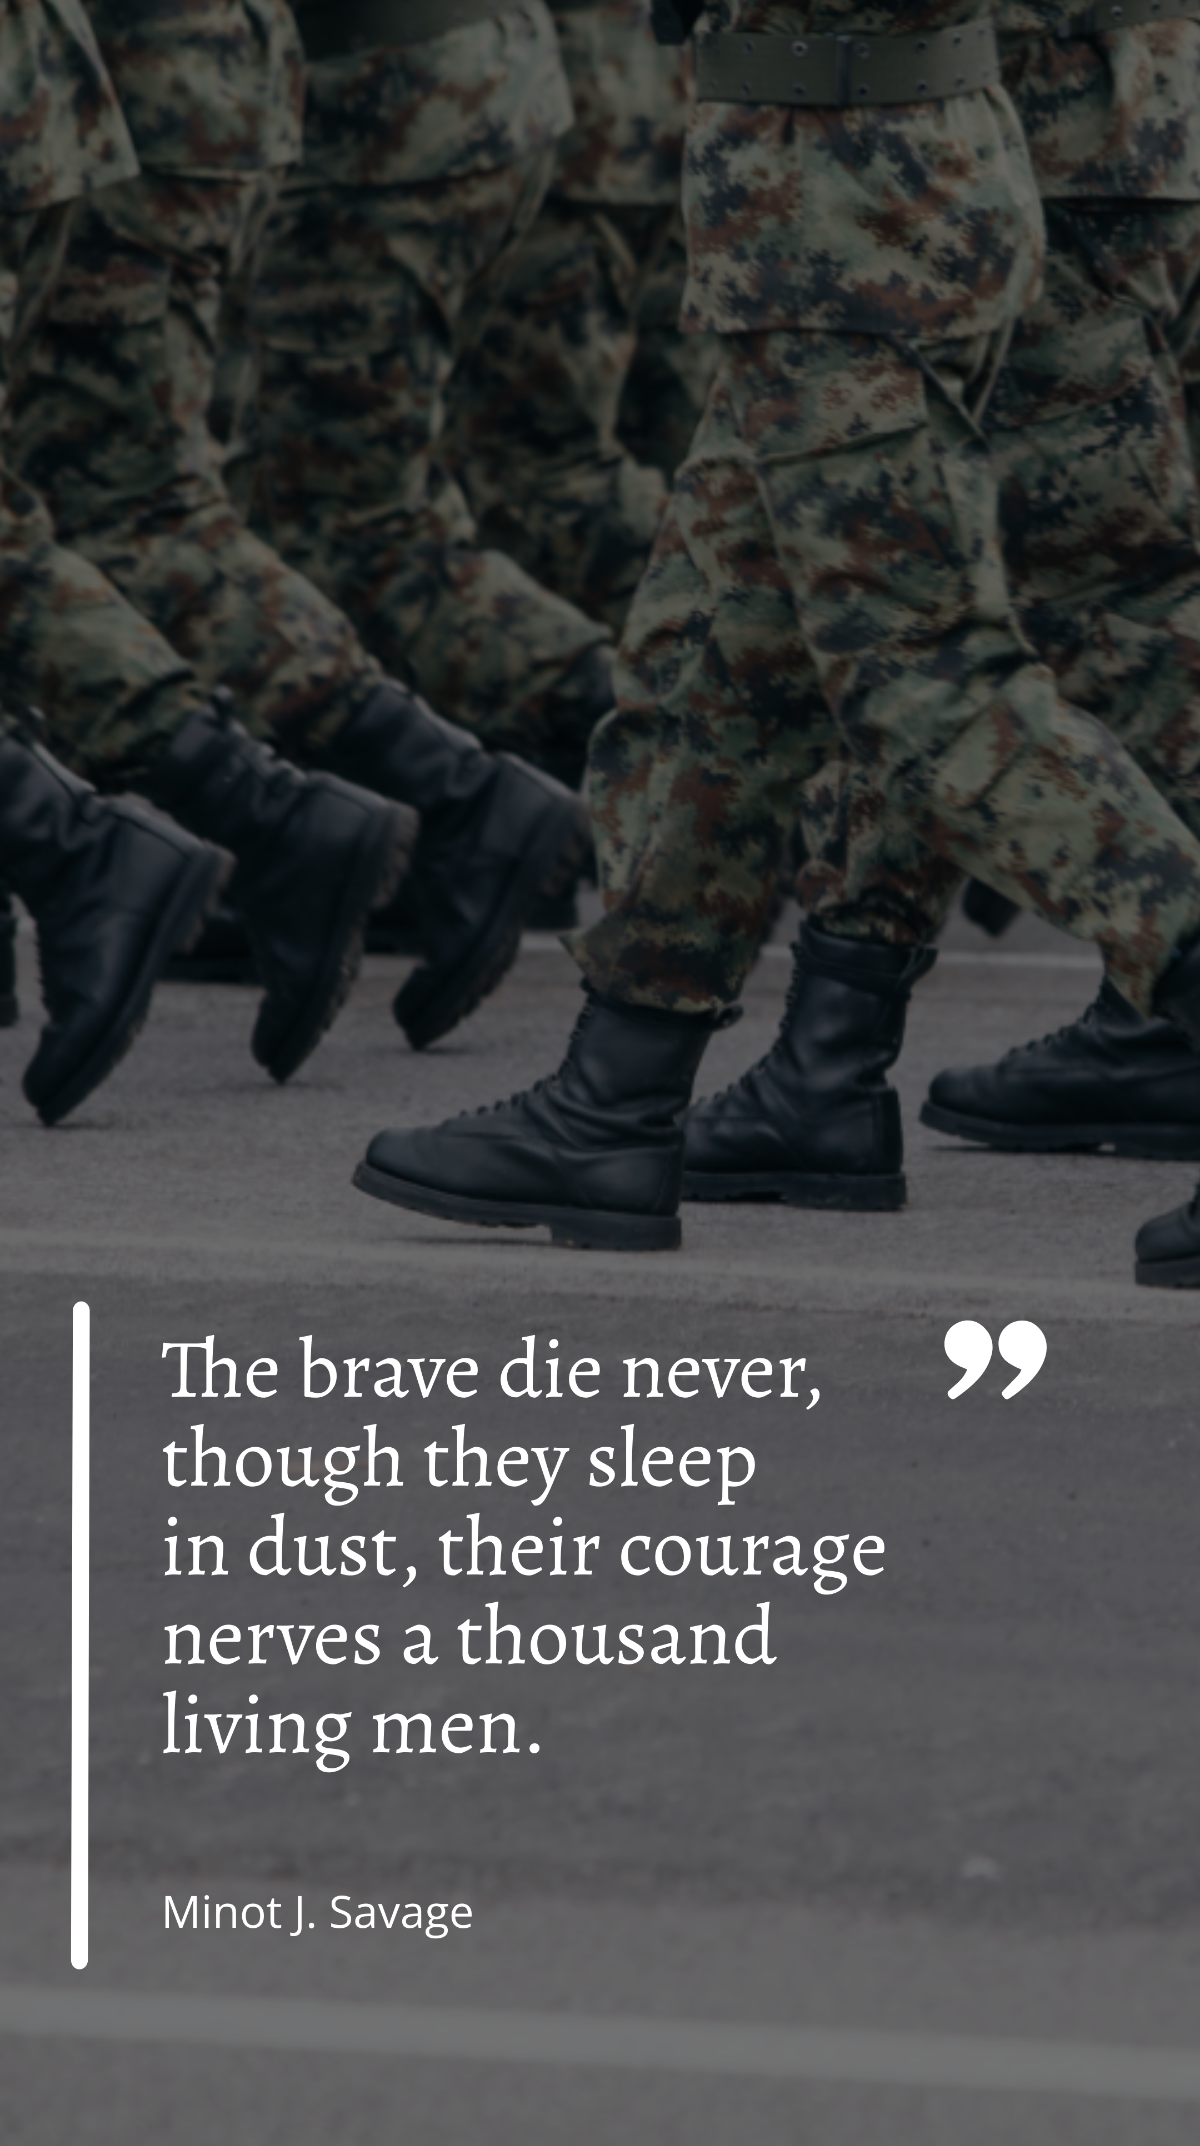 Minot J. Savage - ”The brave die never, though they sleep in dust, their courage nerves a thousand living men.”